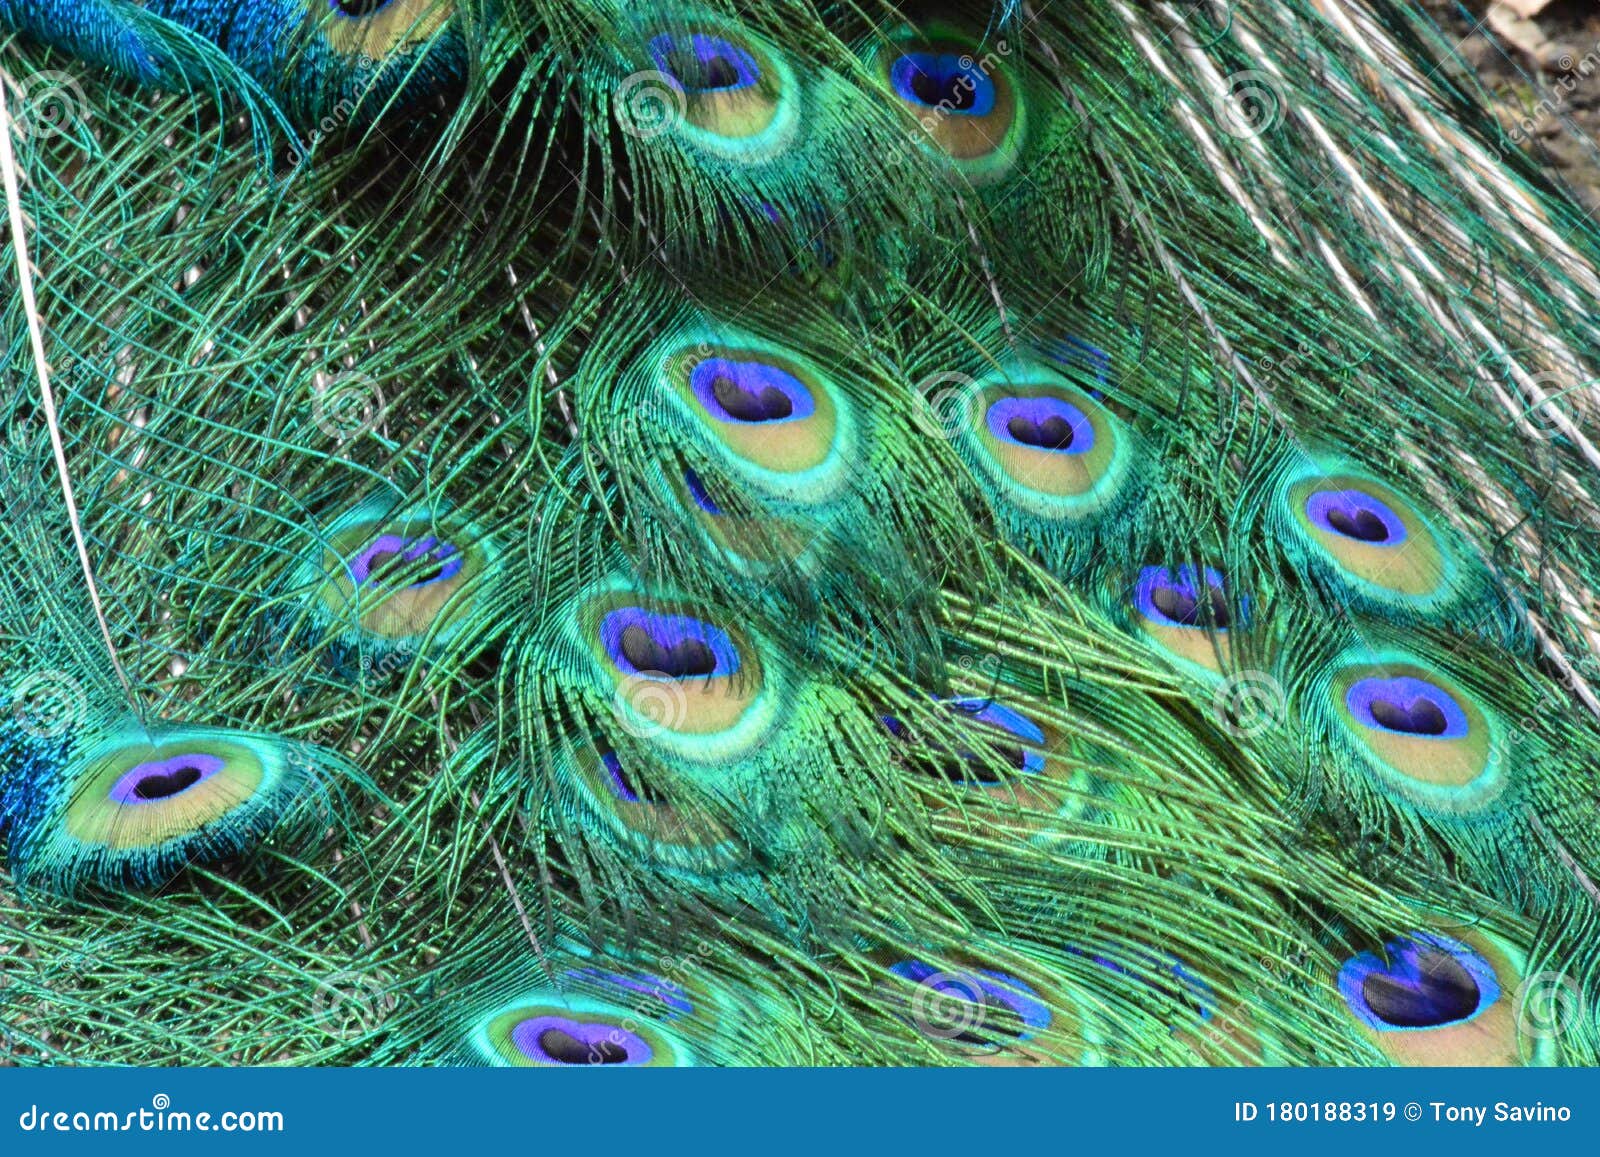 Peacock Feather Eye Blue Green Background Stock Image - Image of  appearance, peacock: 180188319